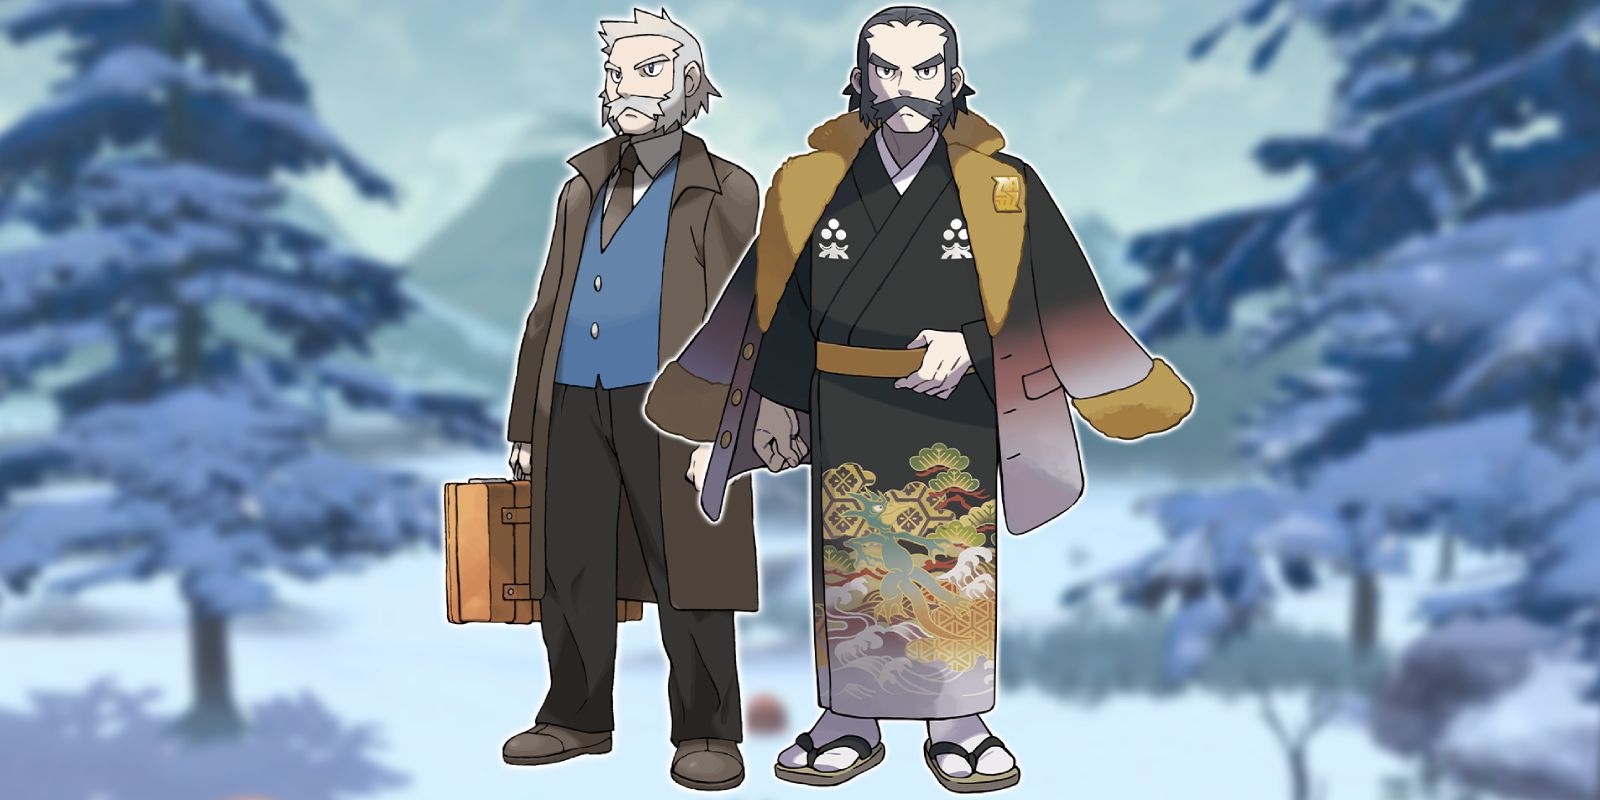 Commander Kamado and Professor Rowan from Pokemon standing next to each other.